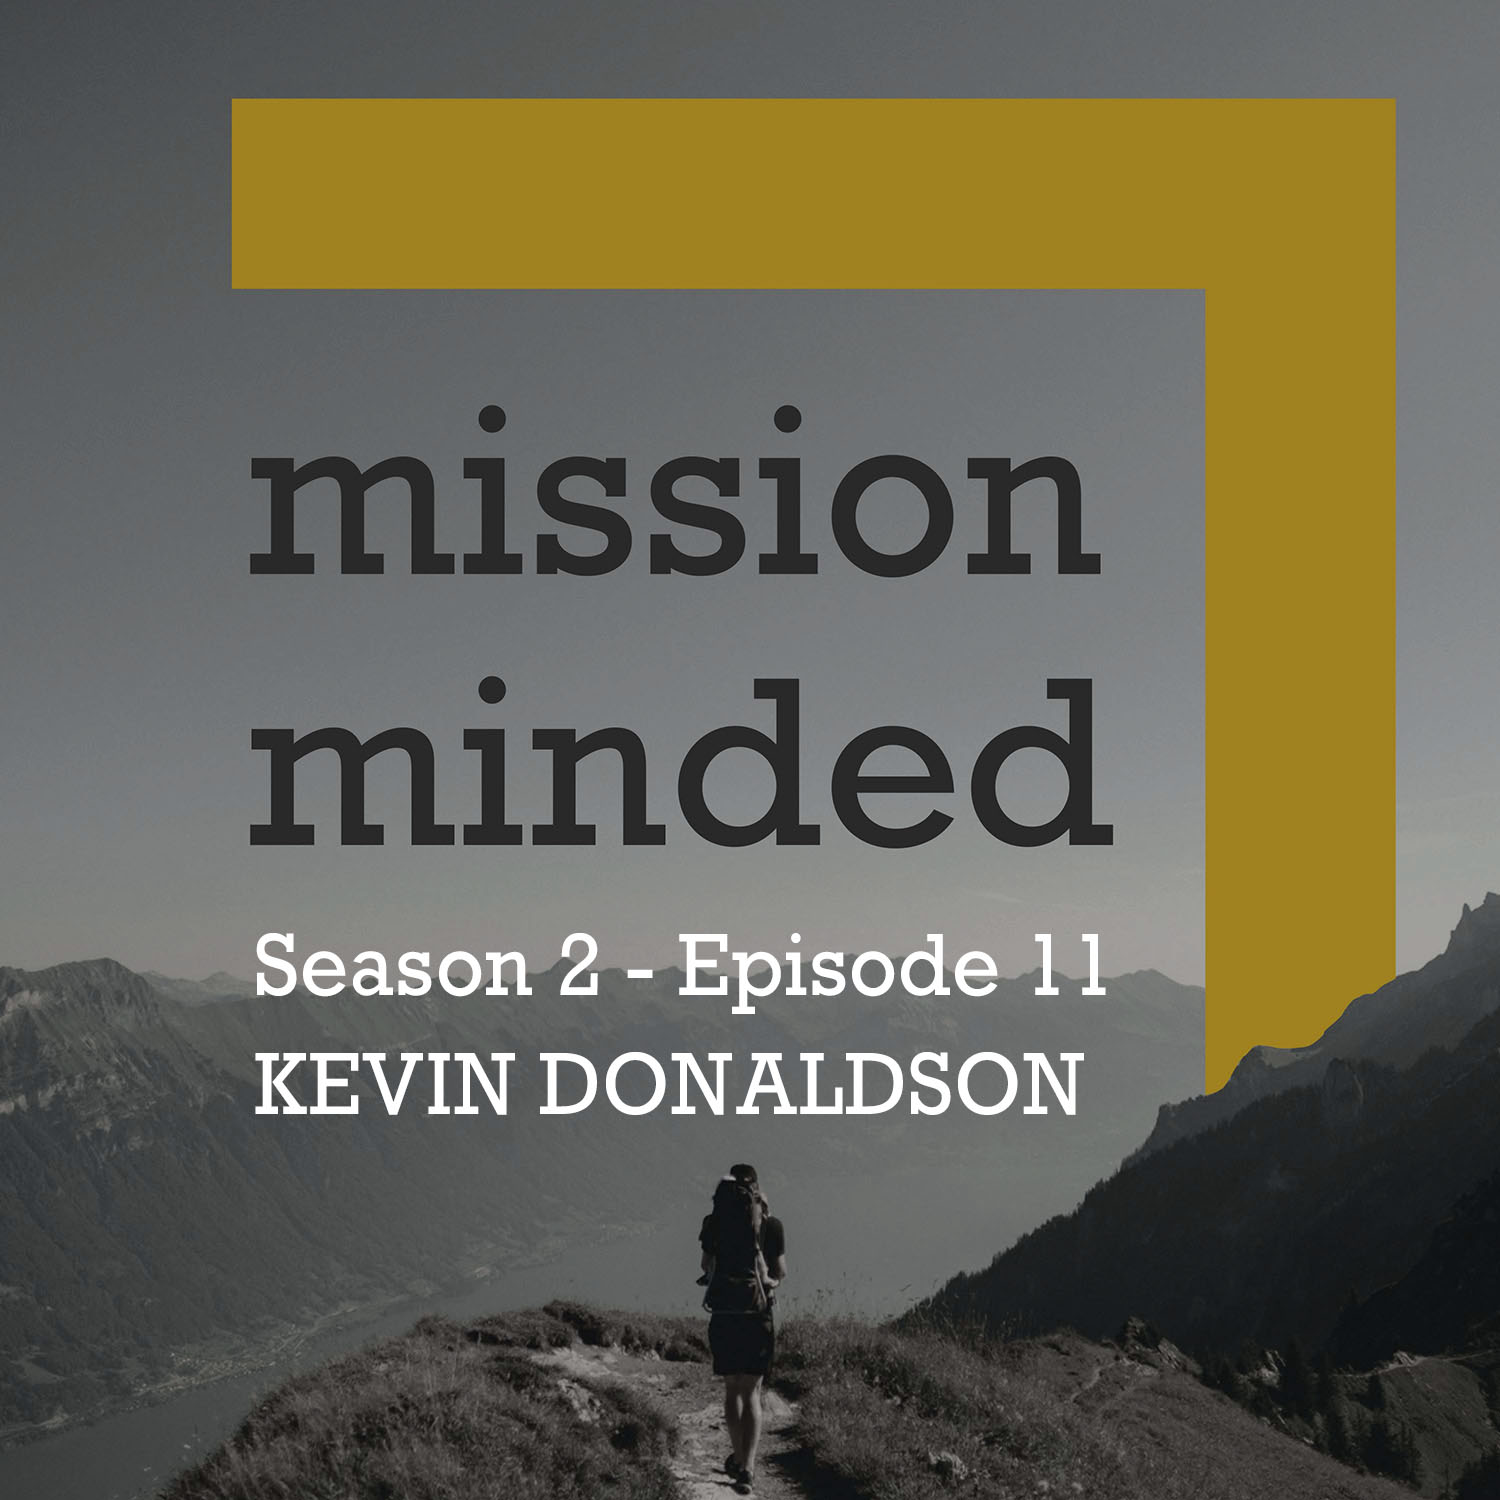 Missionary Pilot Kevin Donaldson Reflects on Aviation Tragedy in Peru